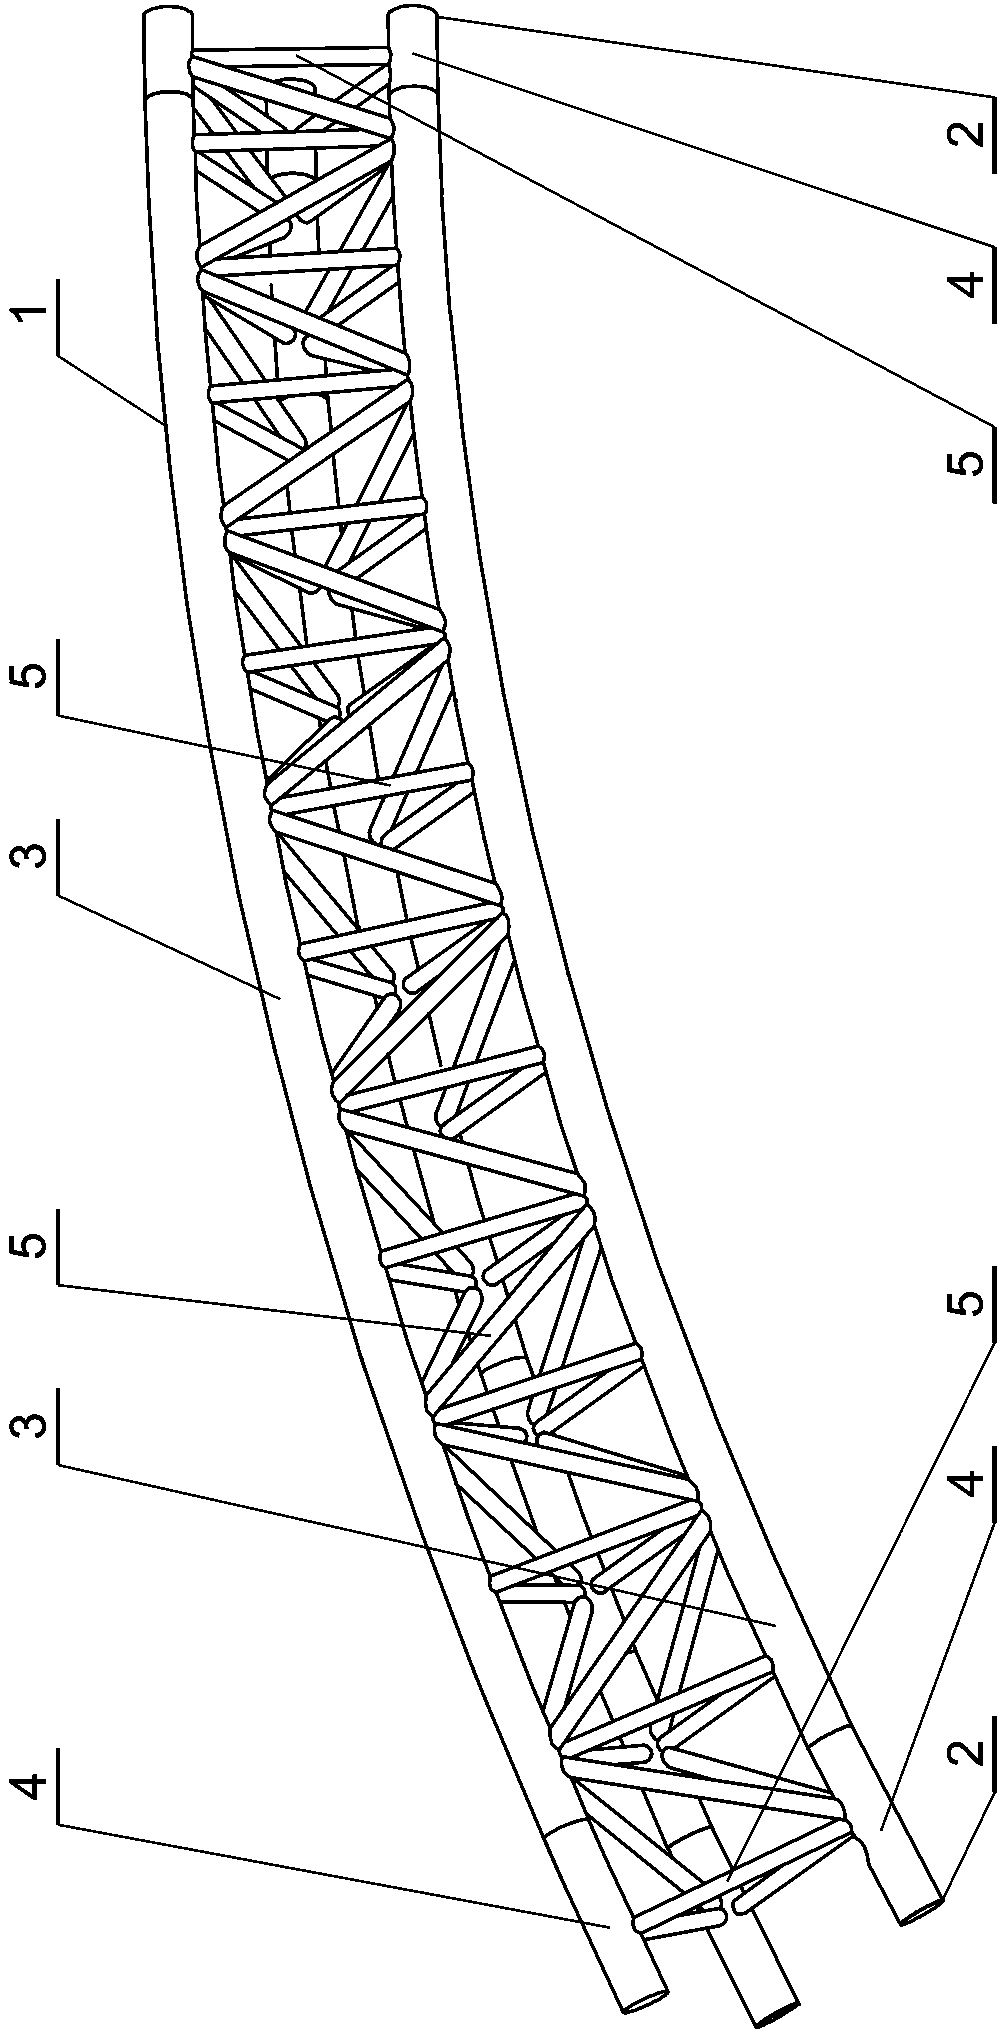 Segmented manufacturing and splicing method for large steel tube truss curved beam with variable cross-sections